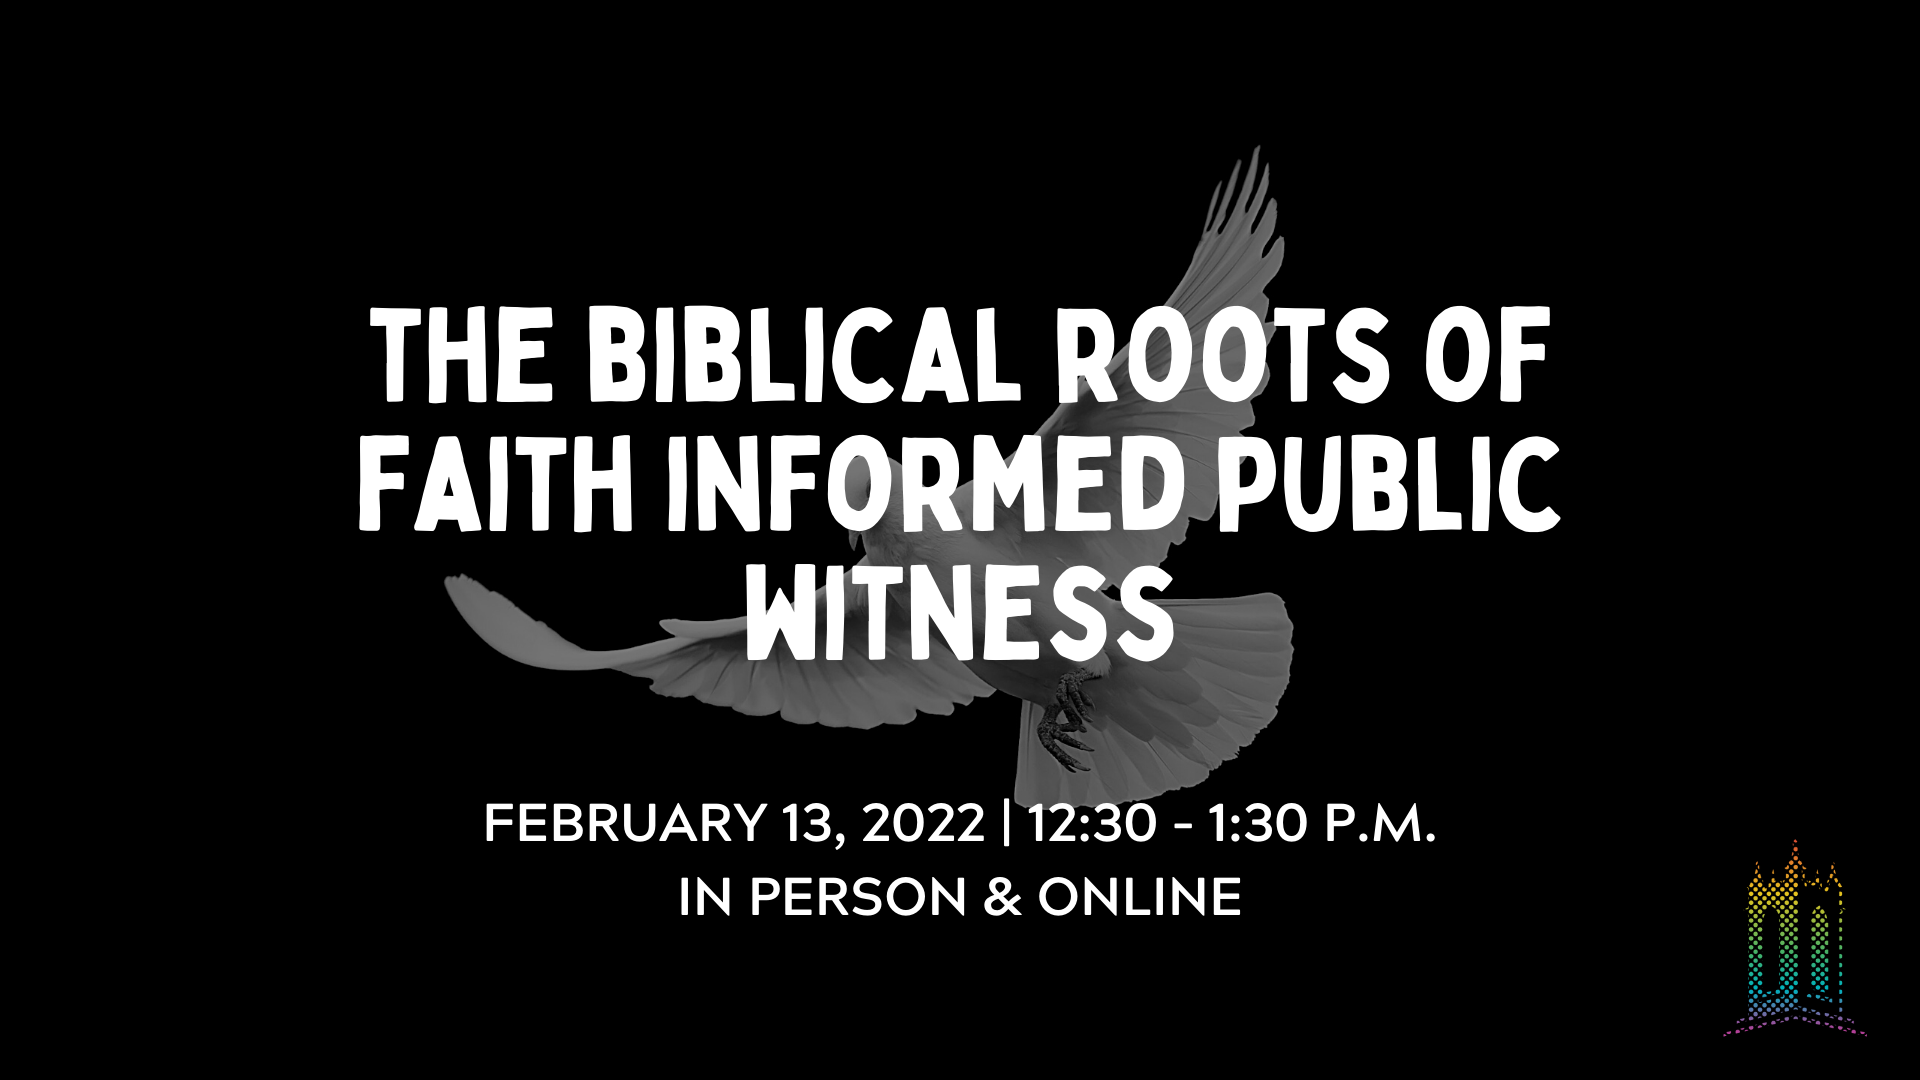 CANCELED: The Biblical Roots of Faith Informed Public Witness